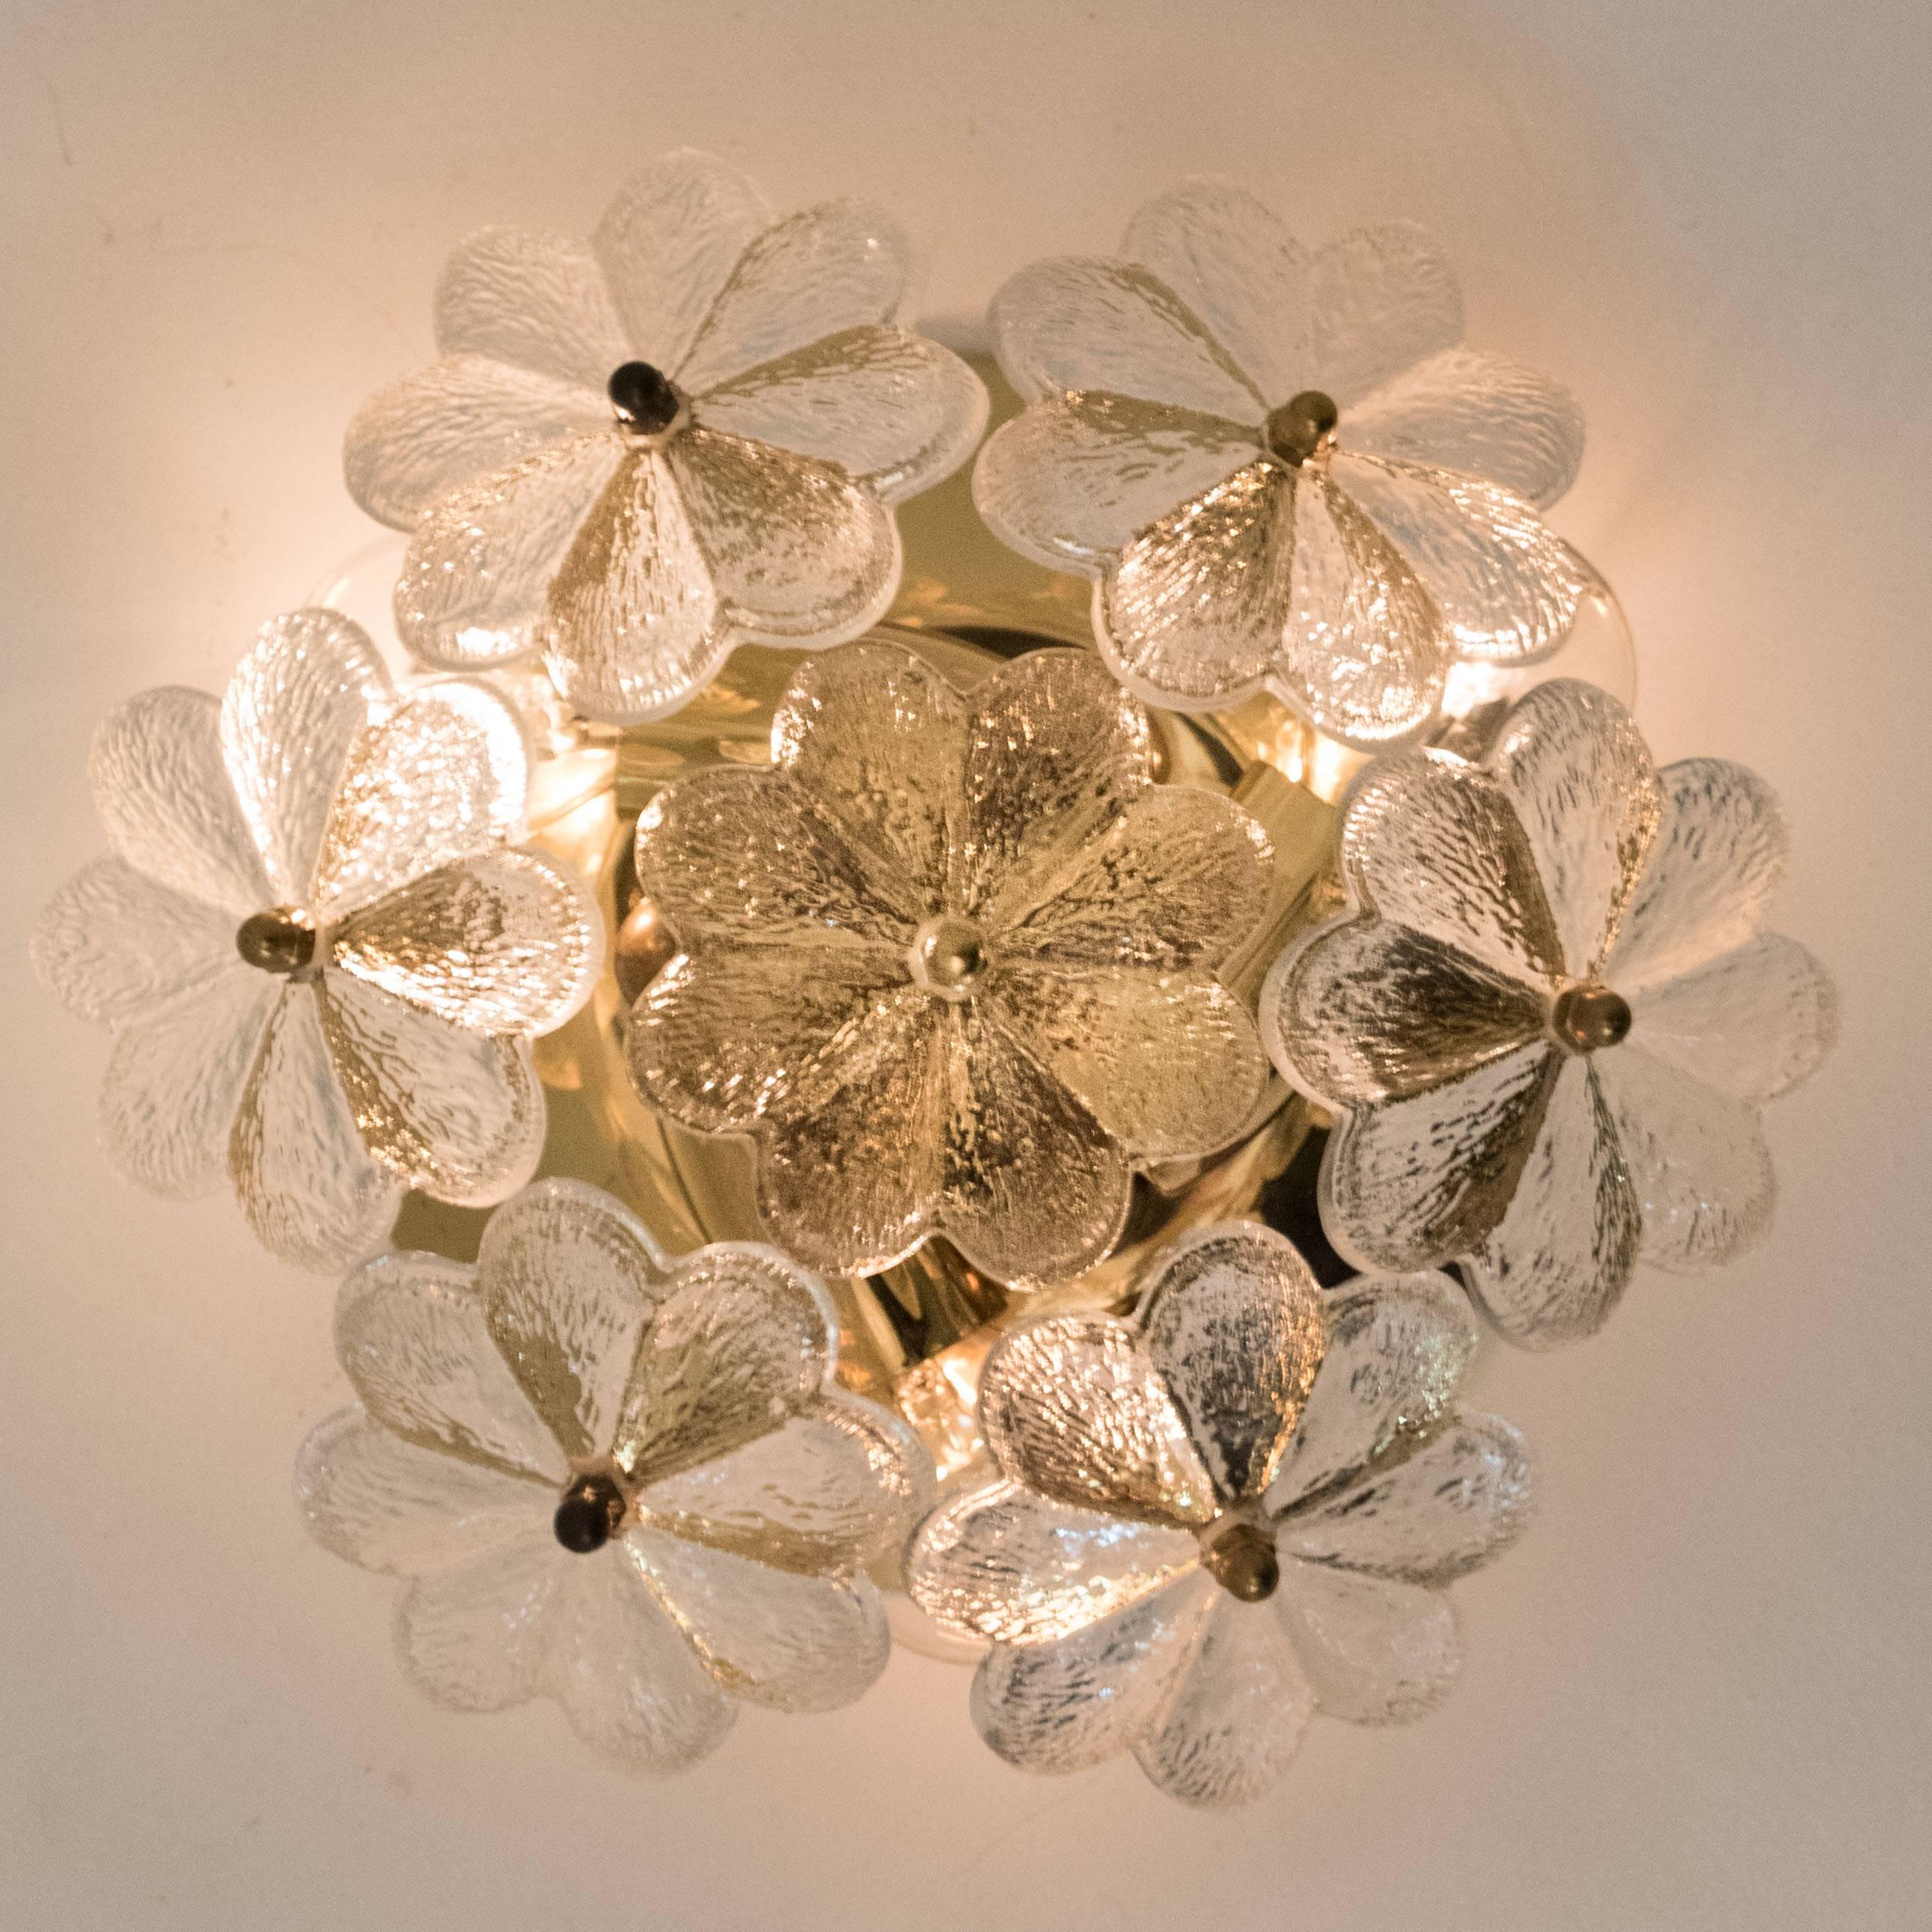 These sculptural wall sconces have the design of a bouquet of textured glass flowers and are from the historical lighting company Ernst Palme. Each light has seven glass shades. Flower shaped.

Each clear glass flower shade has textured petals and